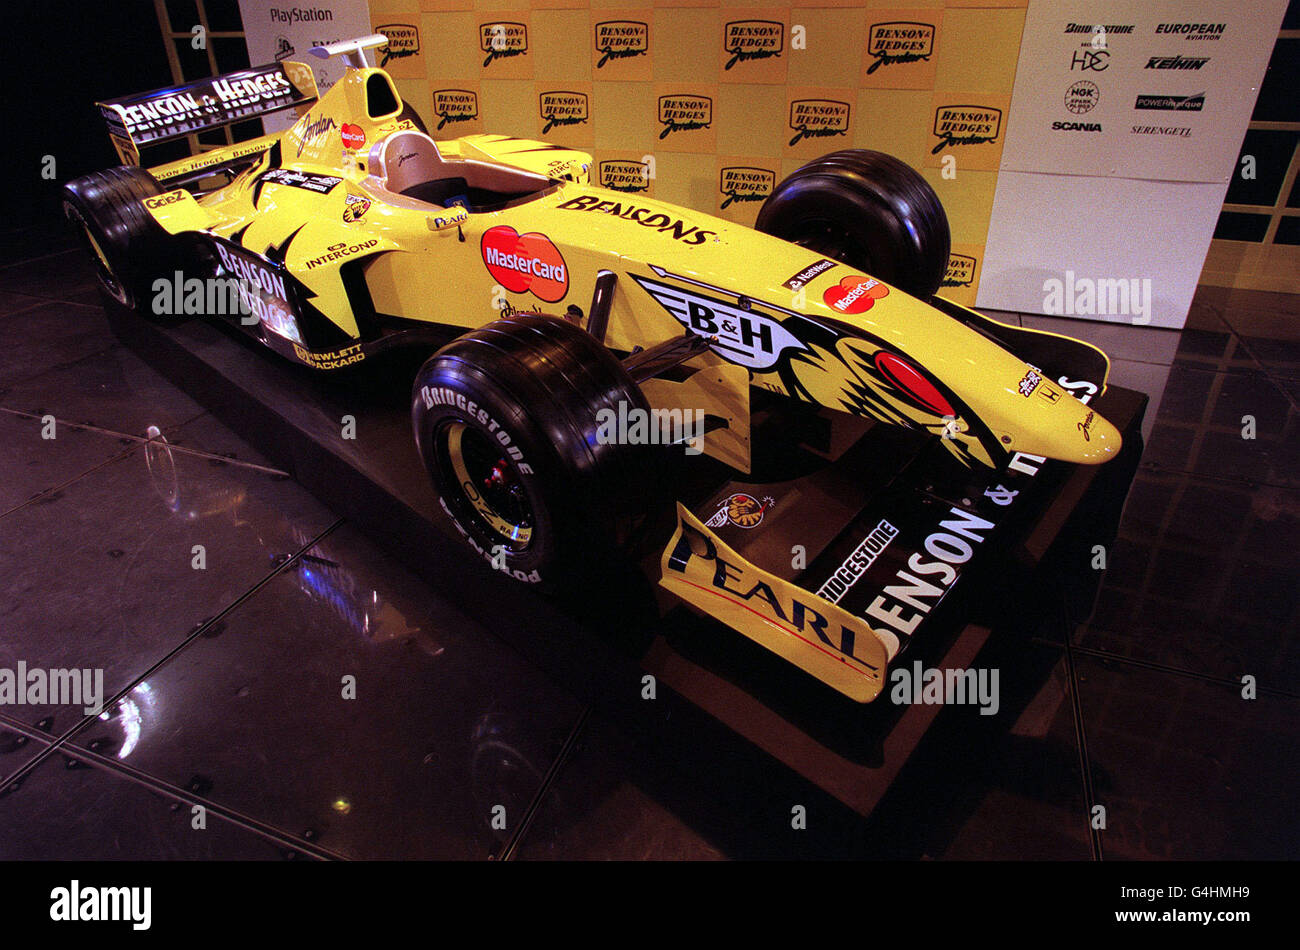 The Jordan team's Mugen-Honda 199 Formula One car, which was launched  during a photocall at the London Palladium Stock Photo - Alamy